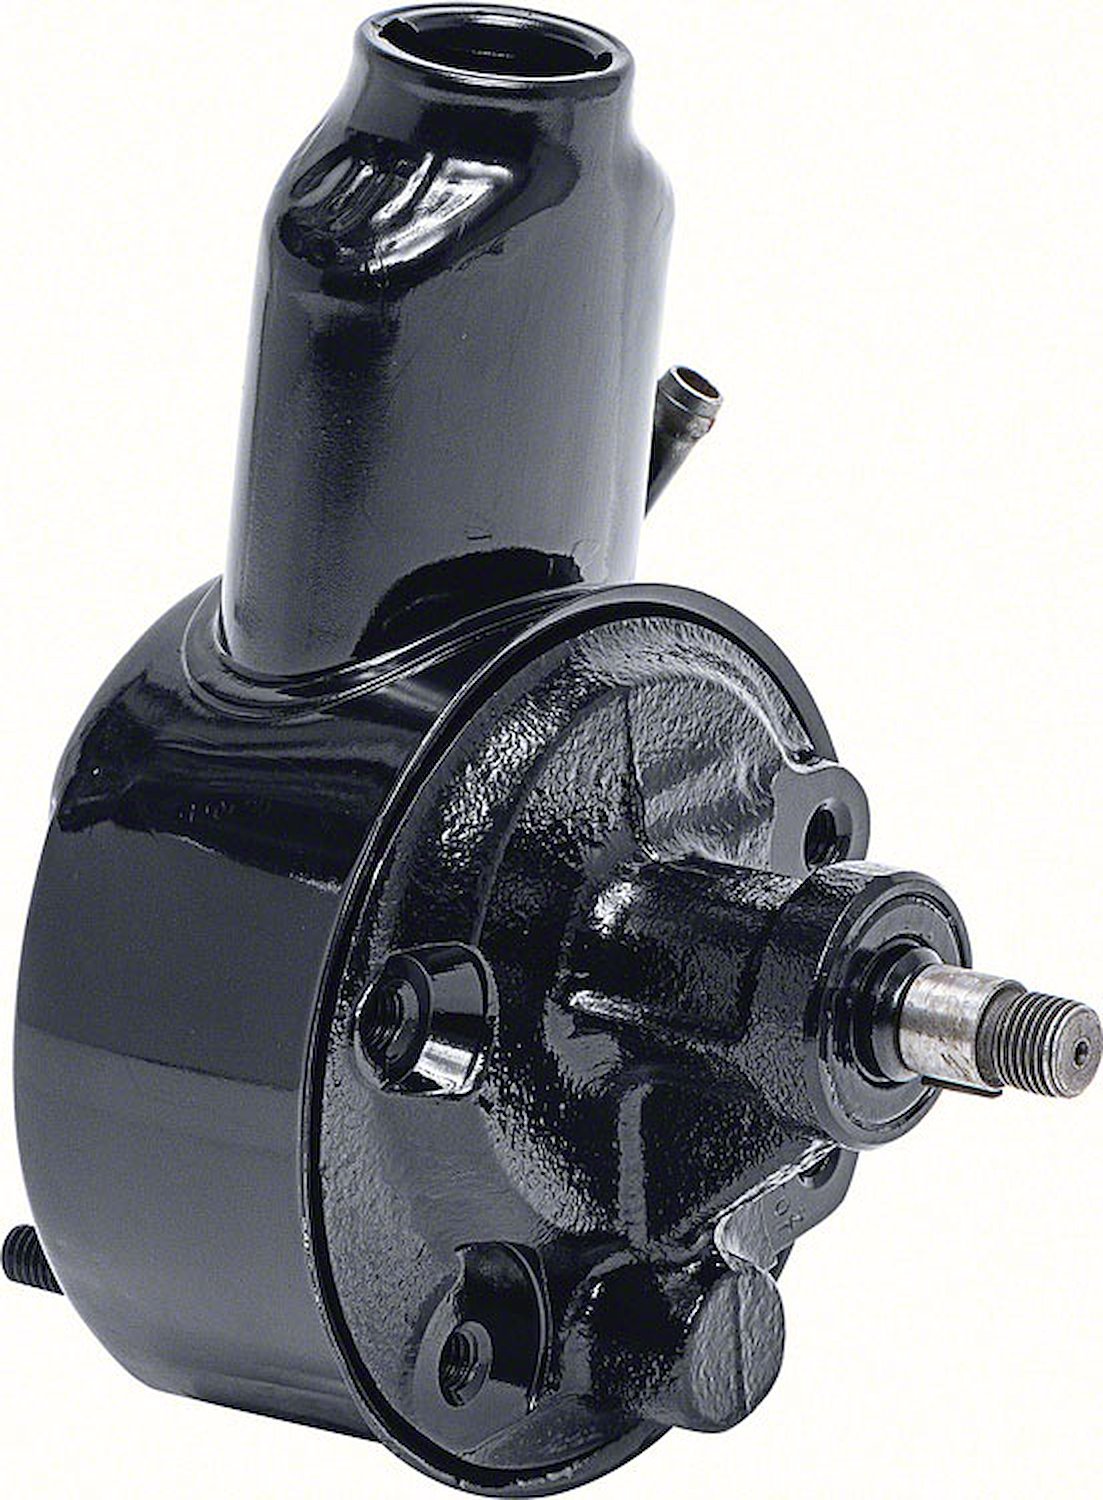 A6111 Remanufactured Power Steering Pump With "Banjo Stype" Reservoir 1967-68 Impala/Full Size 396/427